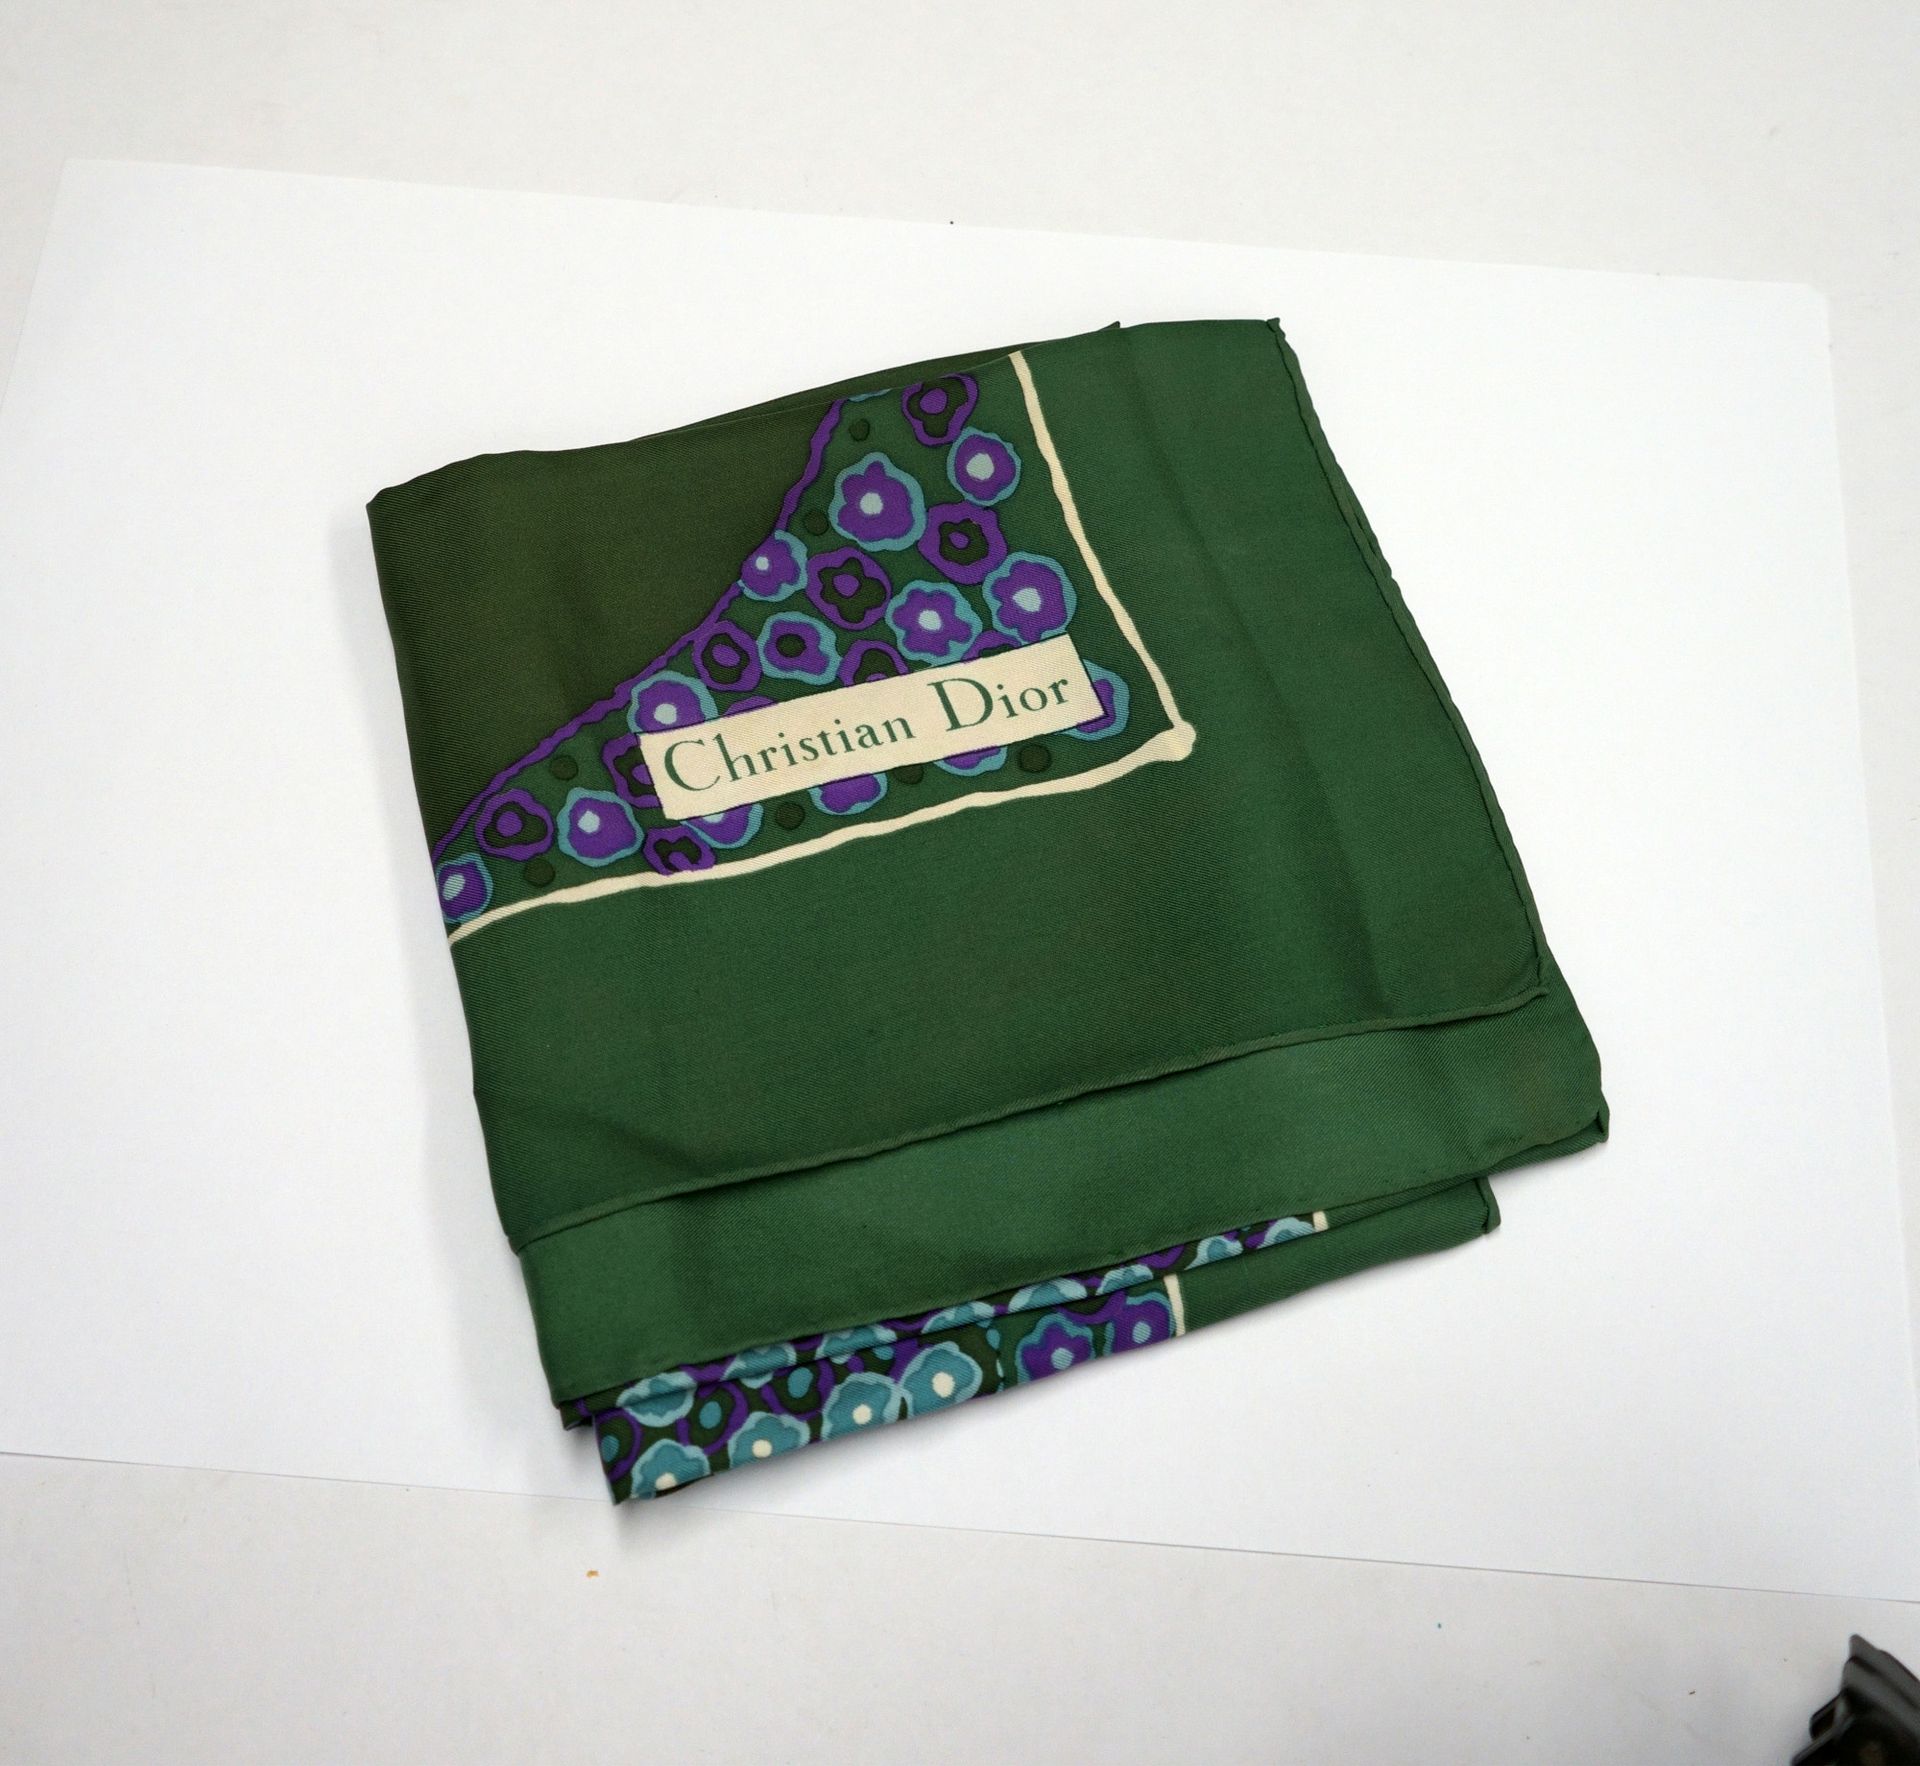 Null CHRISTIAN DIOR - Square silk scarf in shades of green and purple. 75x75cm